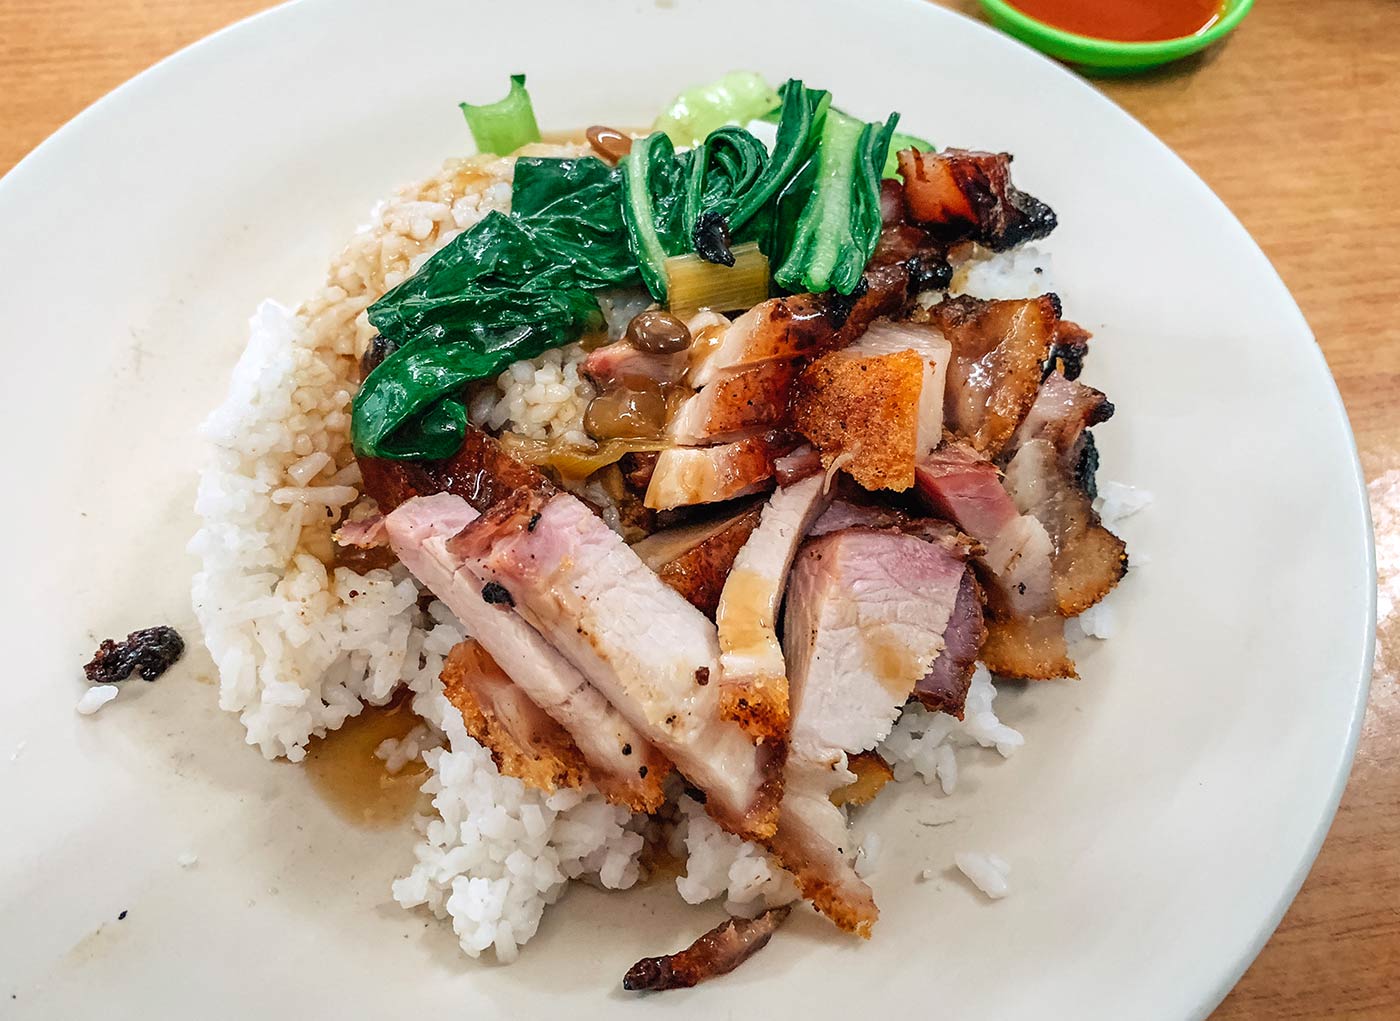 Top foods to try in Georgetown - Penang, Malaysia blog post | Crispy duck or pork with rice